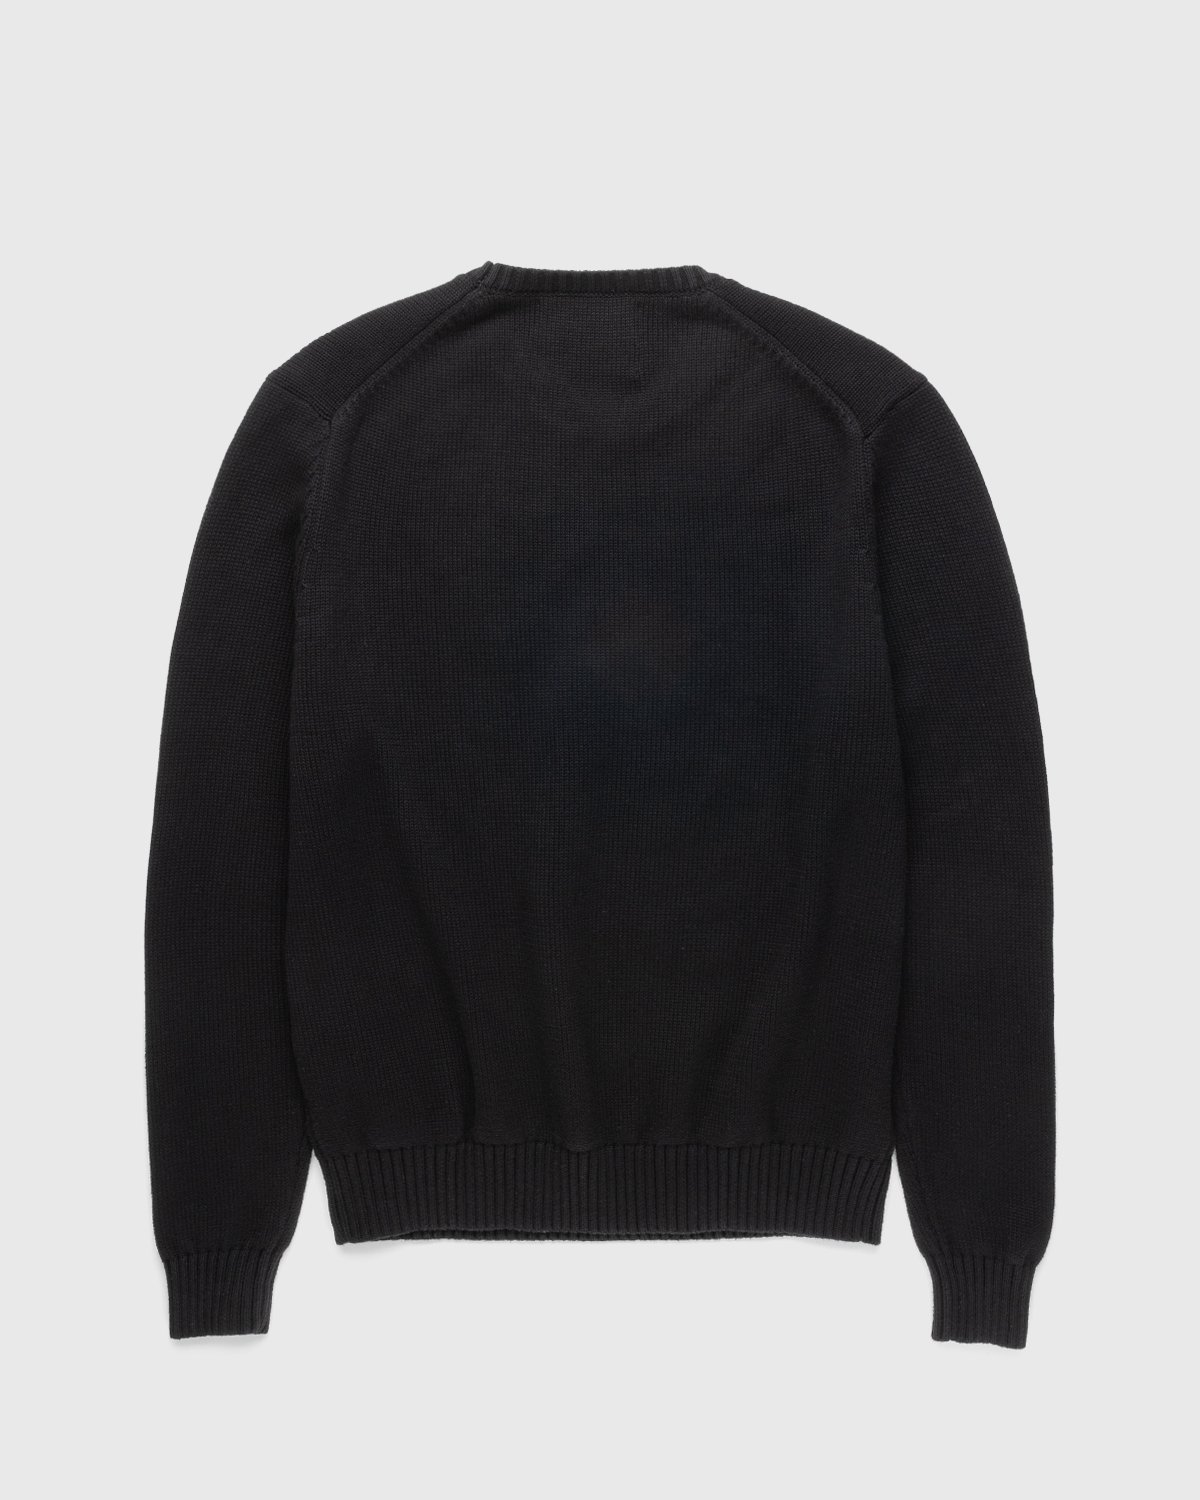 Patta - Boxer Knitted Sweater - Clothing - Black - Image 2